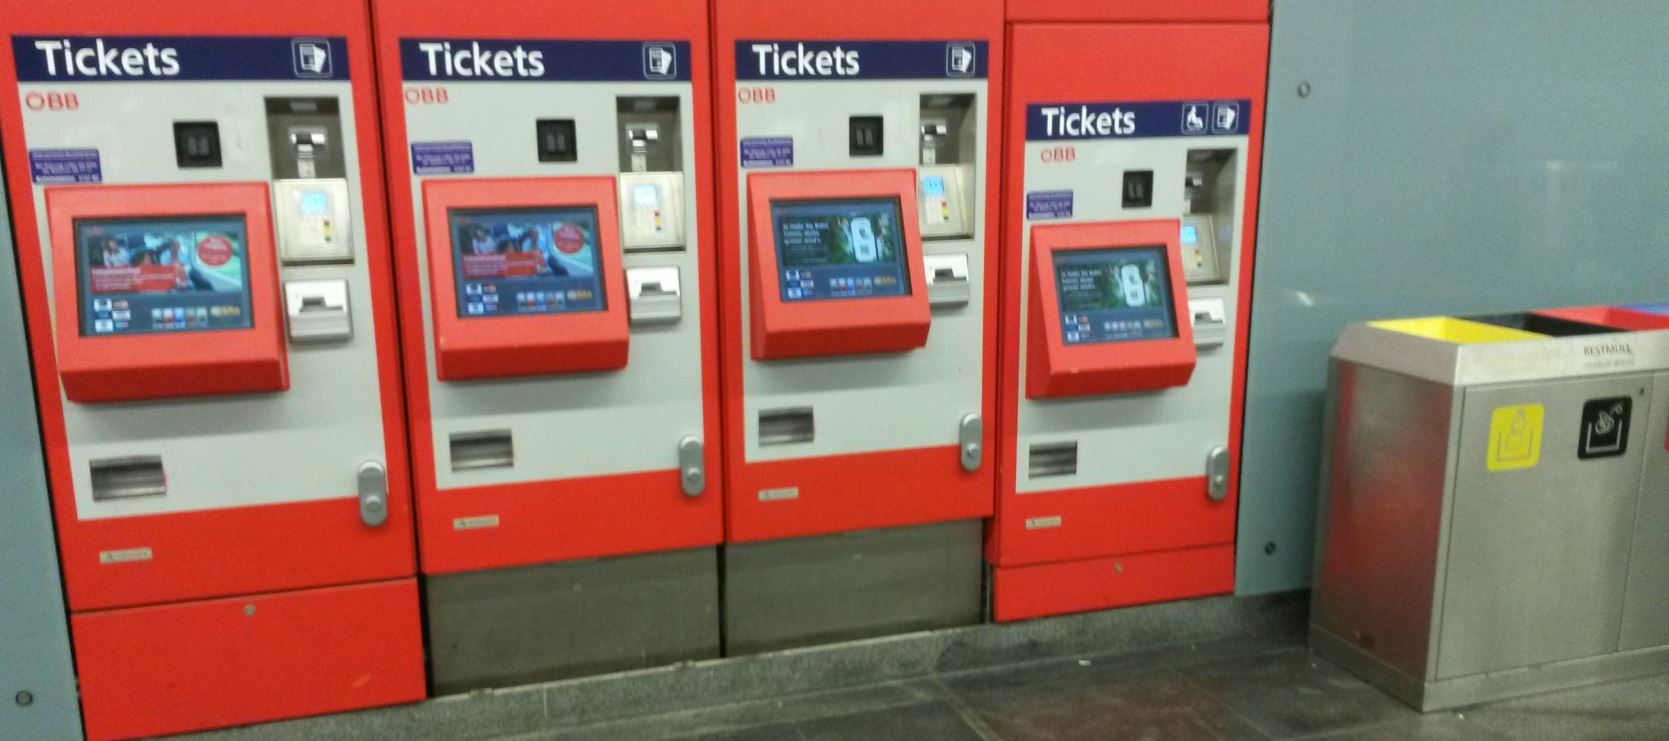 [Vienna]At the large Vienna Meidling station there are more than a dozen ticket machines (inevitable given the lack of a smartcard system). One of this bank of four machines is much lower  to be usable by wheelchair users. Whether it makes sense to put litter bin right next to it, making manoeuvrability less easy, is another matter